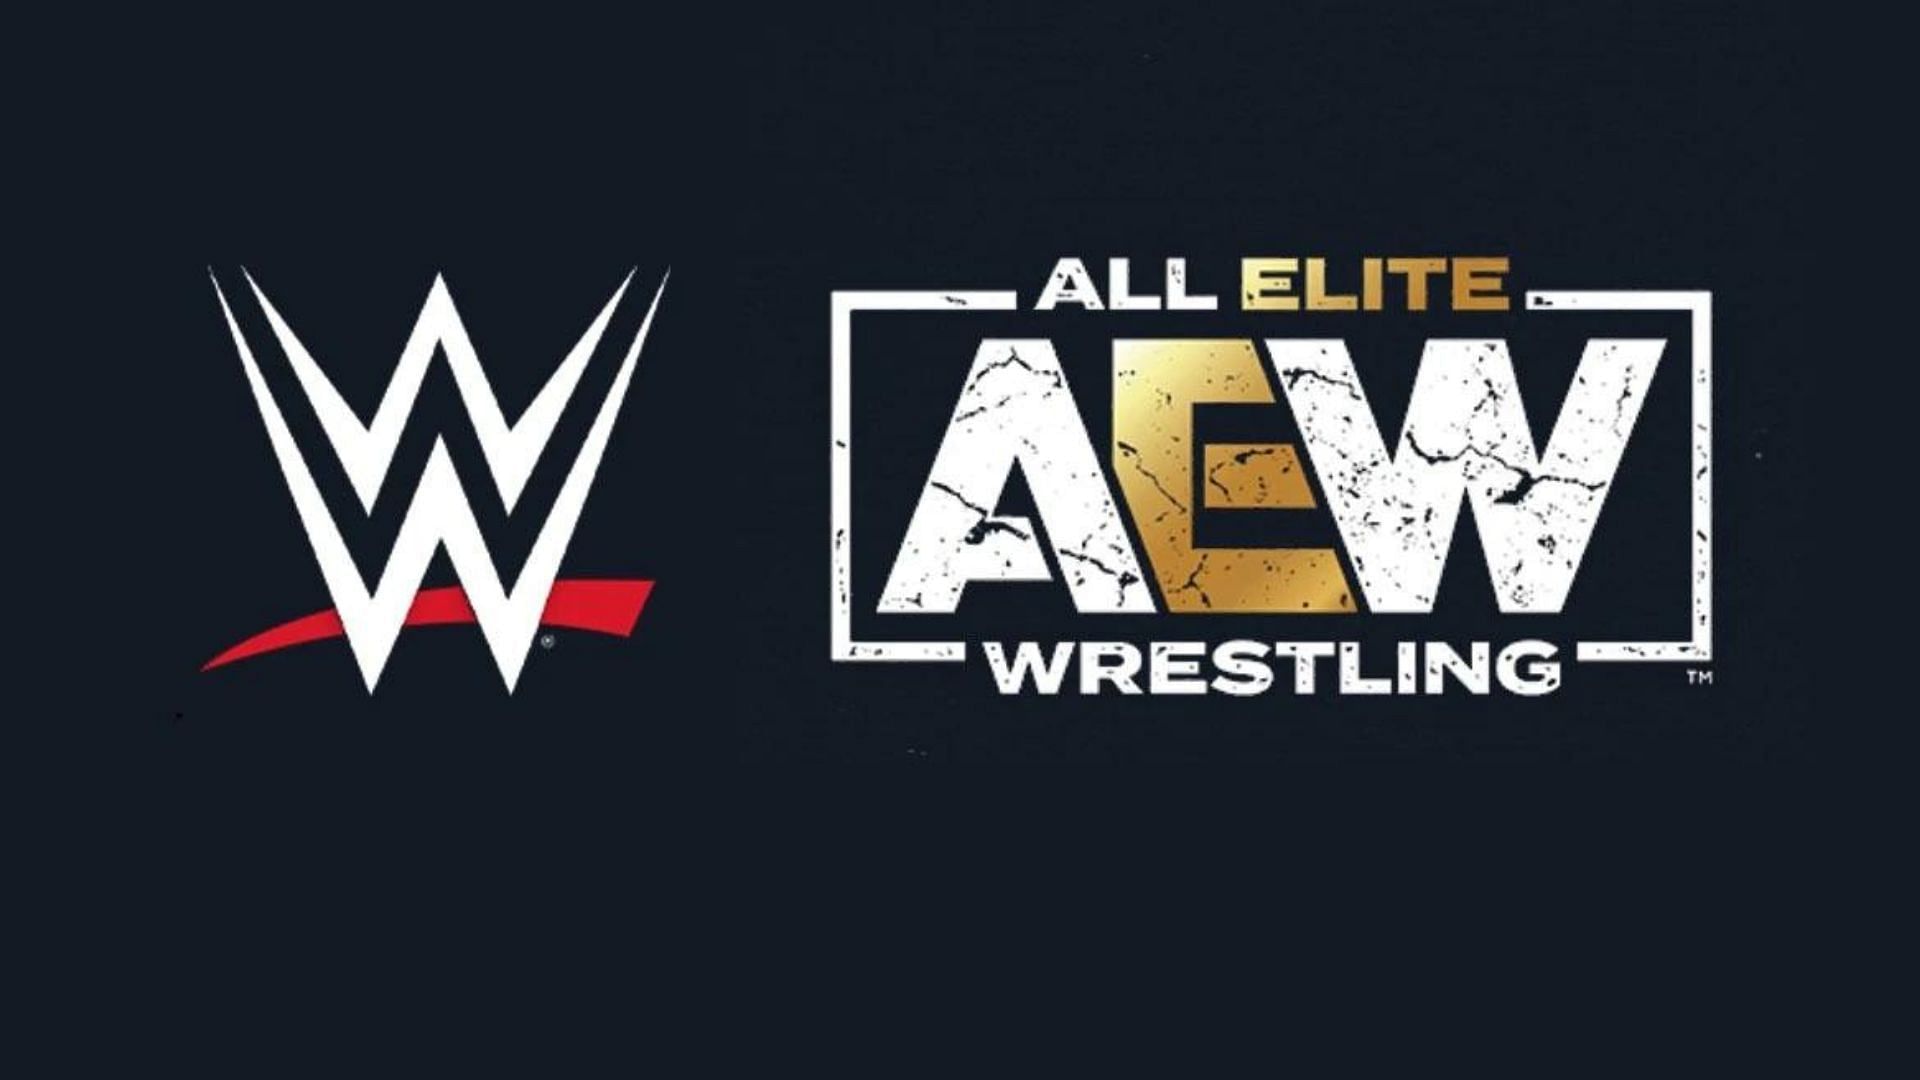 A former WWE star had an interesting response to AEW debut